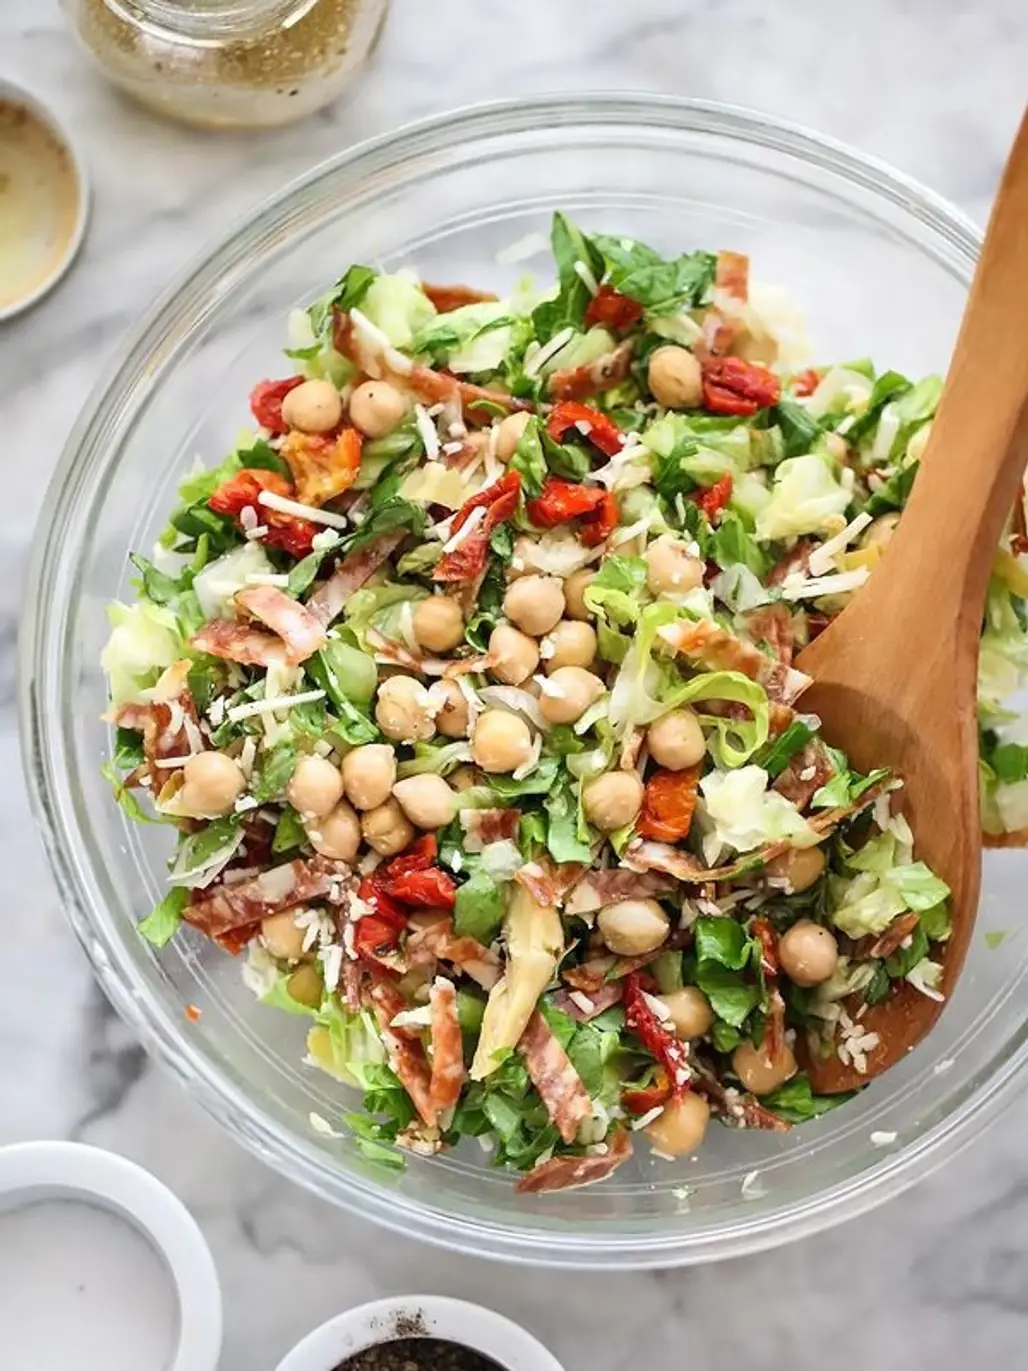 La Scala Inspired Chopped Salad with Marinated Chickpeas